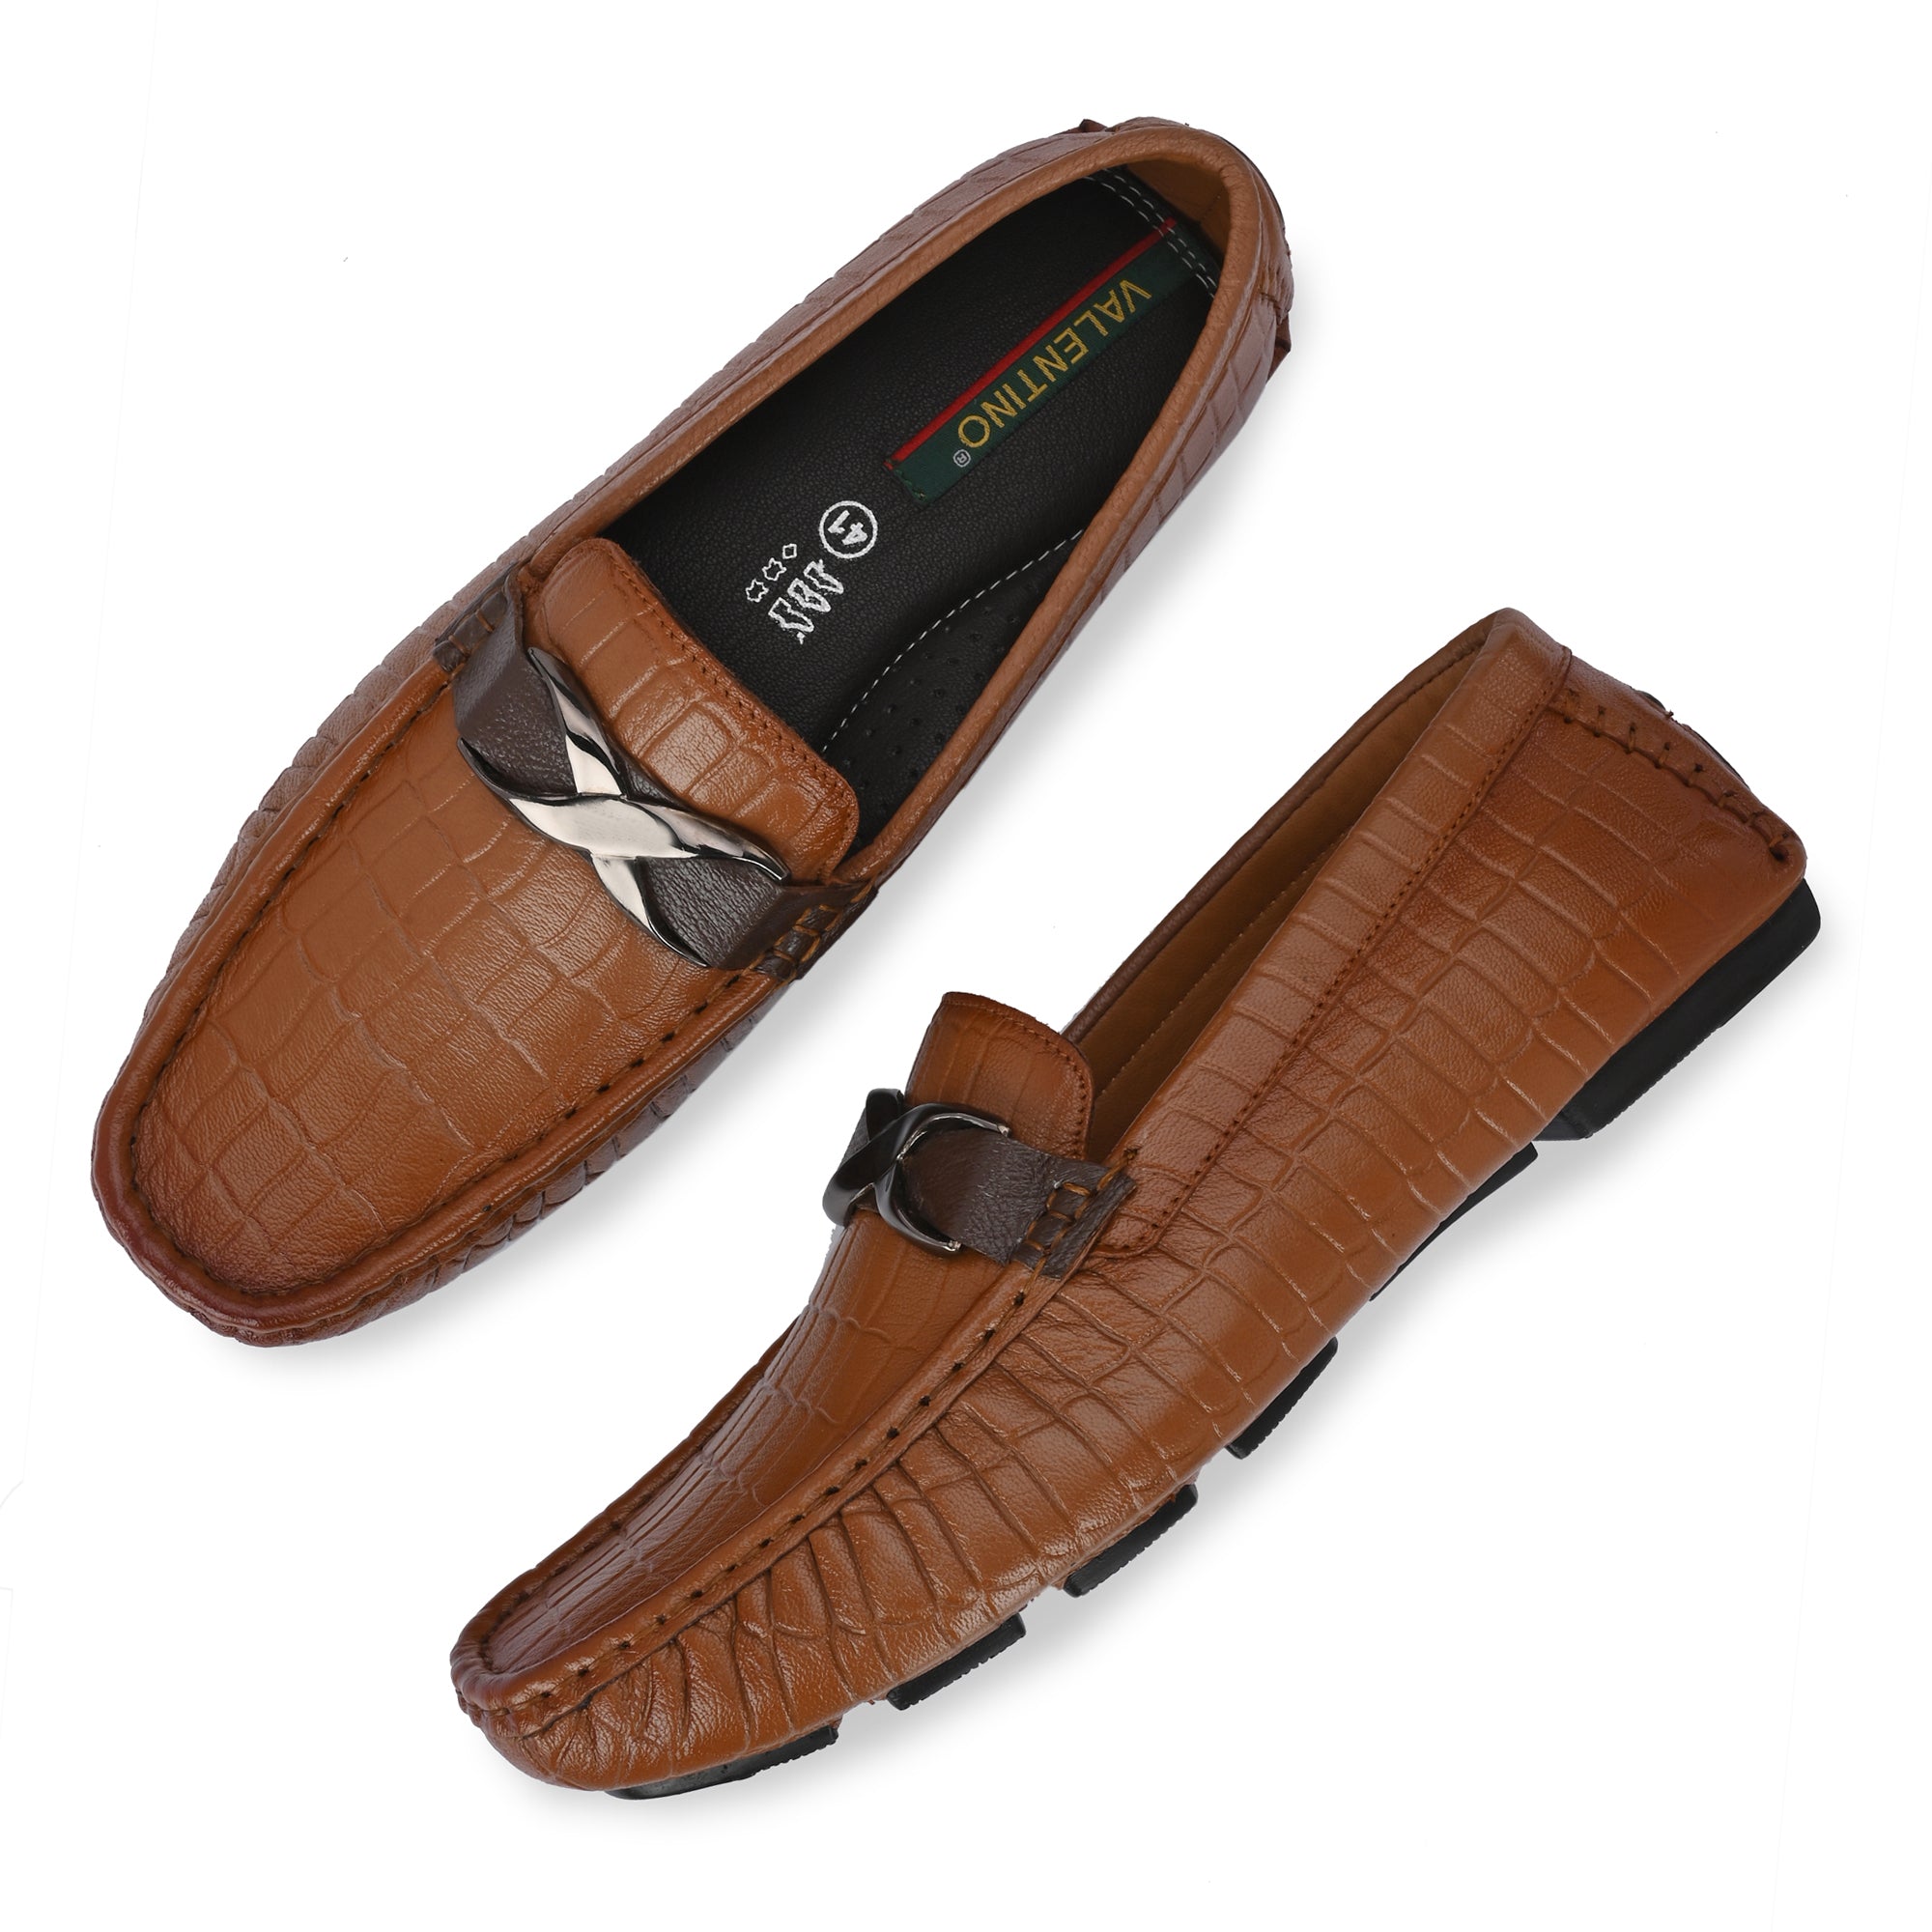 EMPORIO-38 MEN LEATHER TAN CASUAL SLIP ON DRIVING